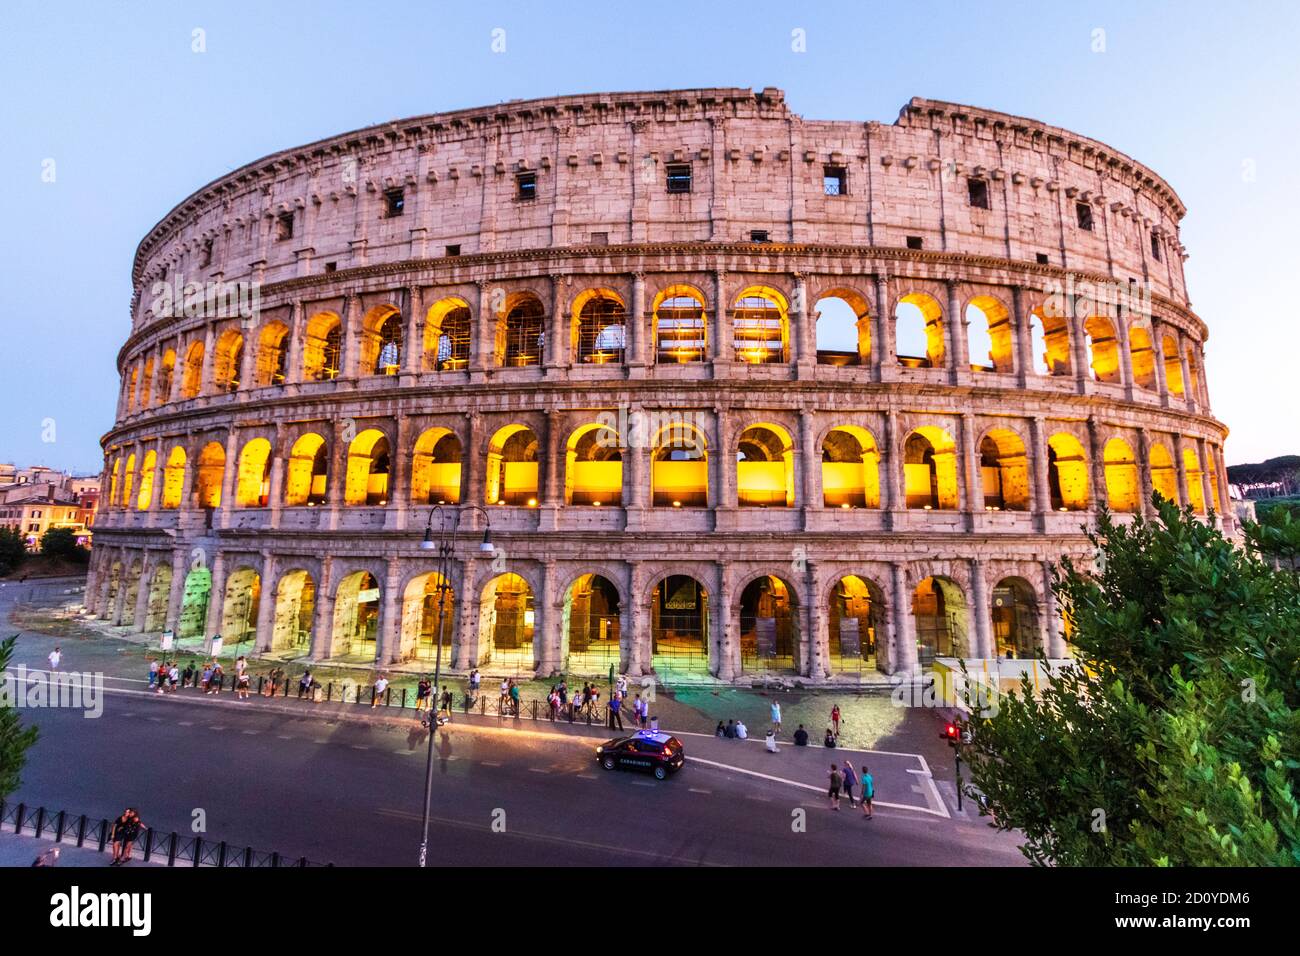 The illuminated Roman Colosseum in rome during the blue hour in the early  evening with the floors lit up by yellow lighting. People in the foreground  Stock Photo - Alamy